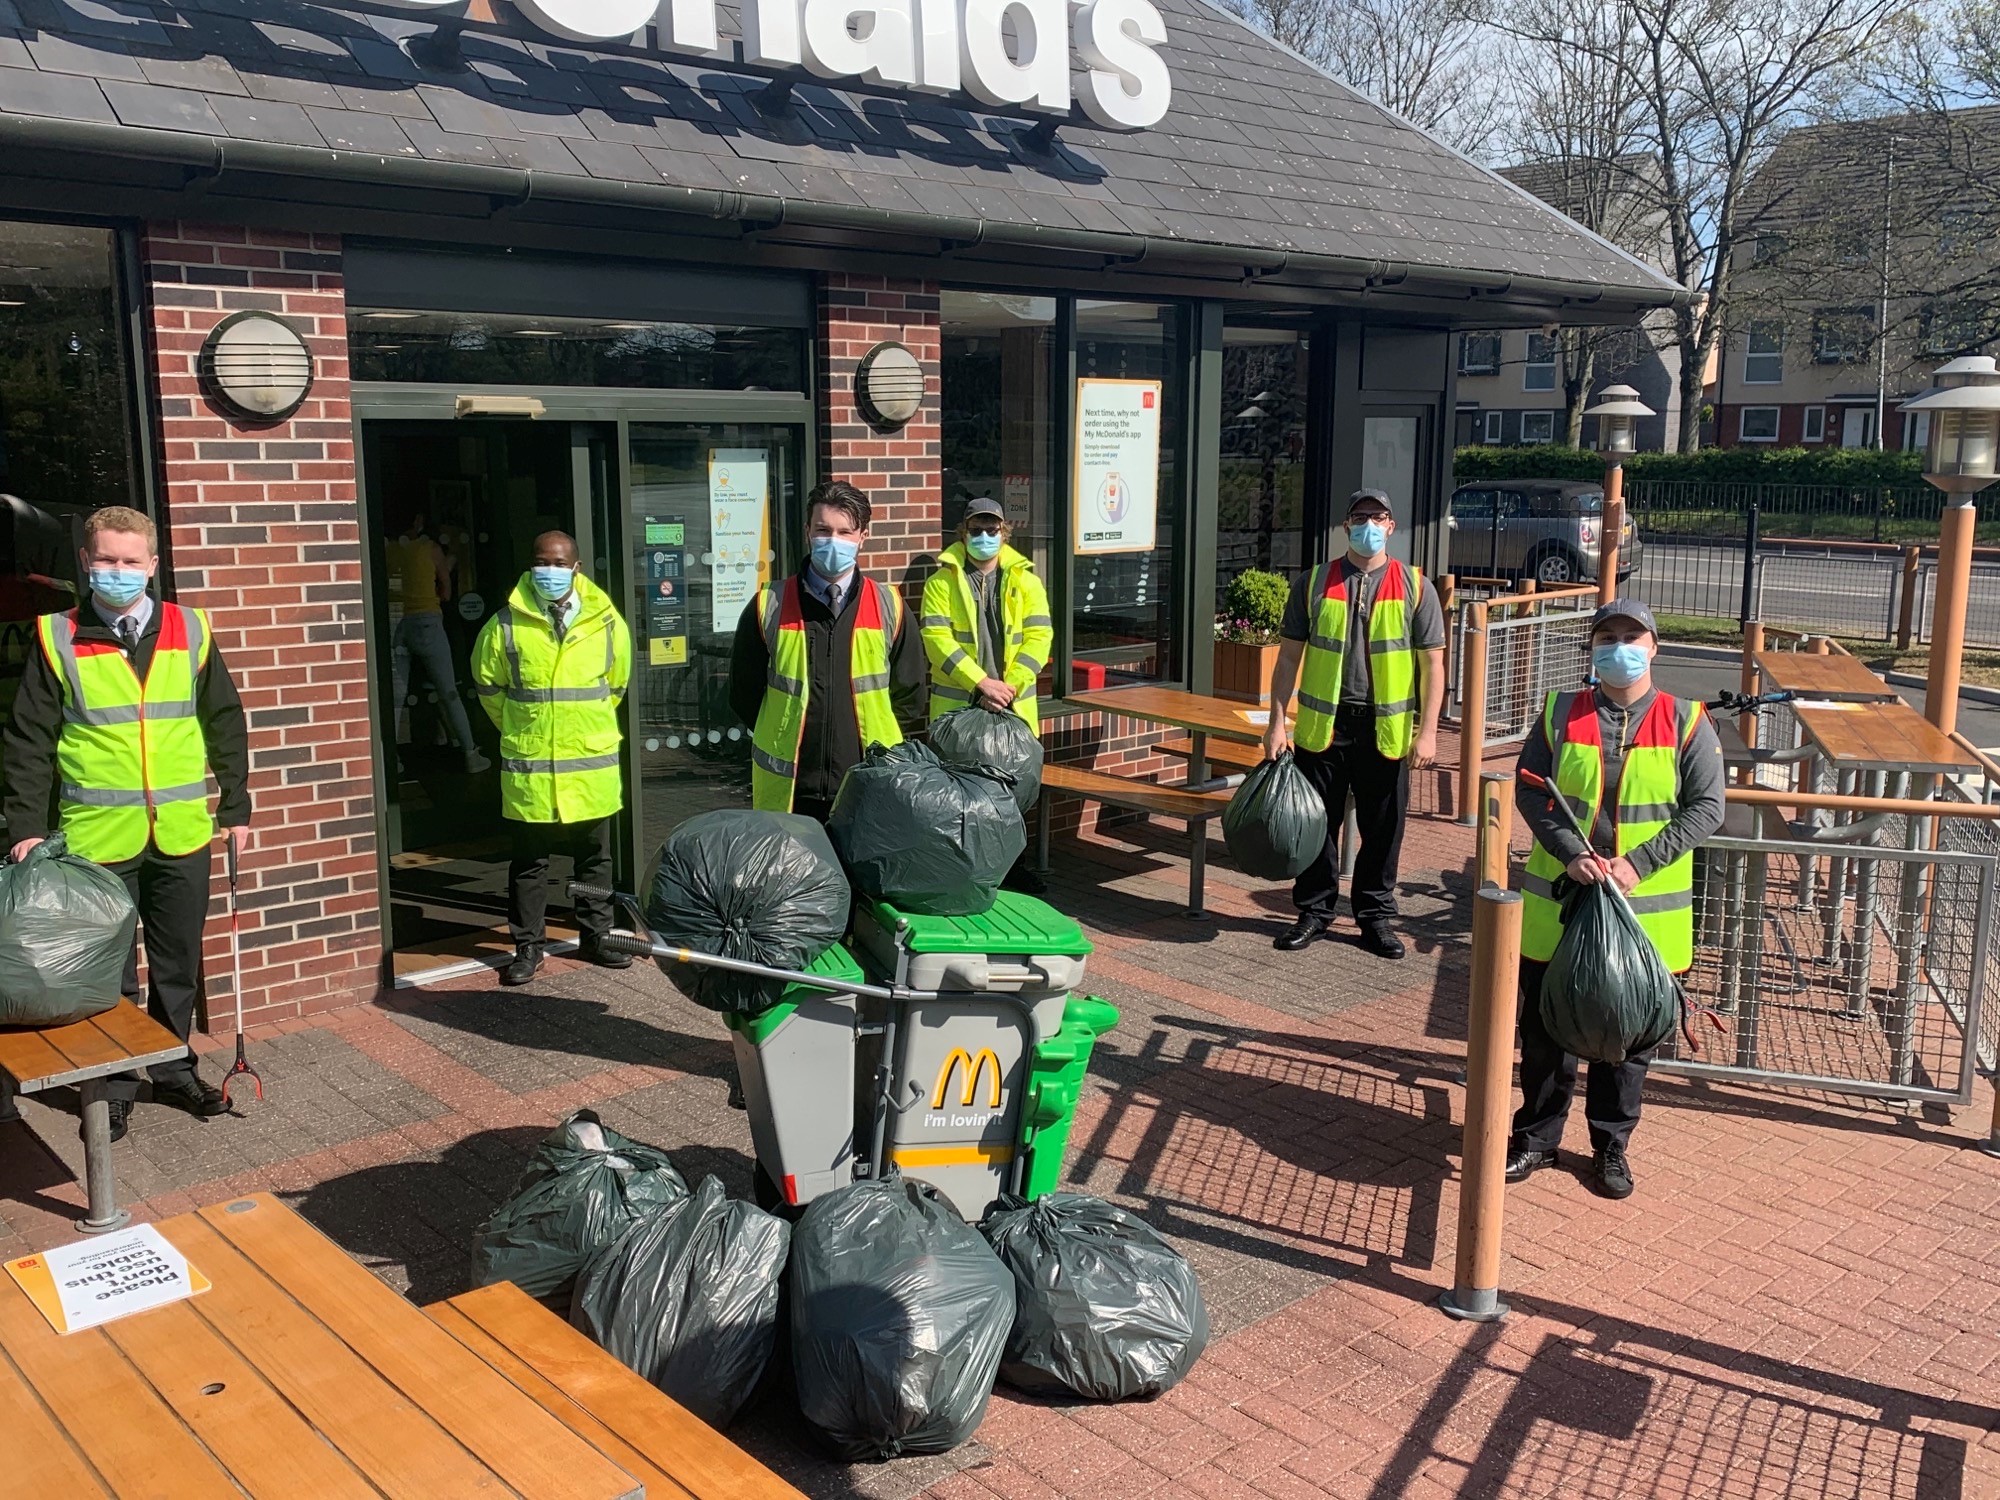 NEWS | Ronald’s Rangers – McDonald’s joins the fight against litter in Hereford